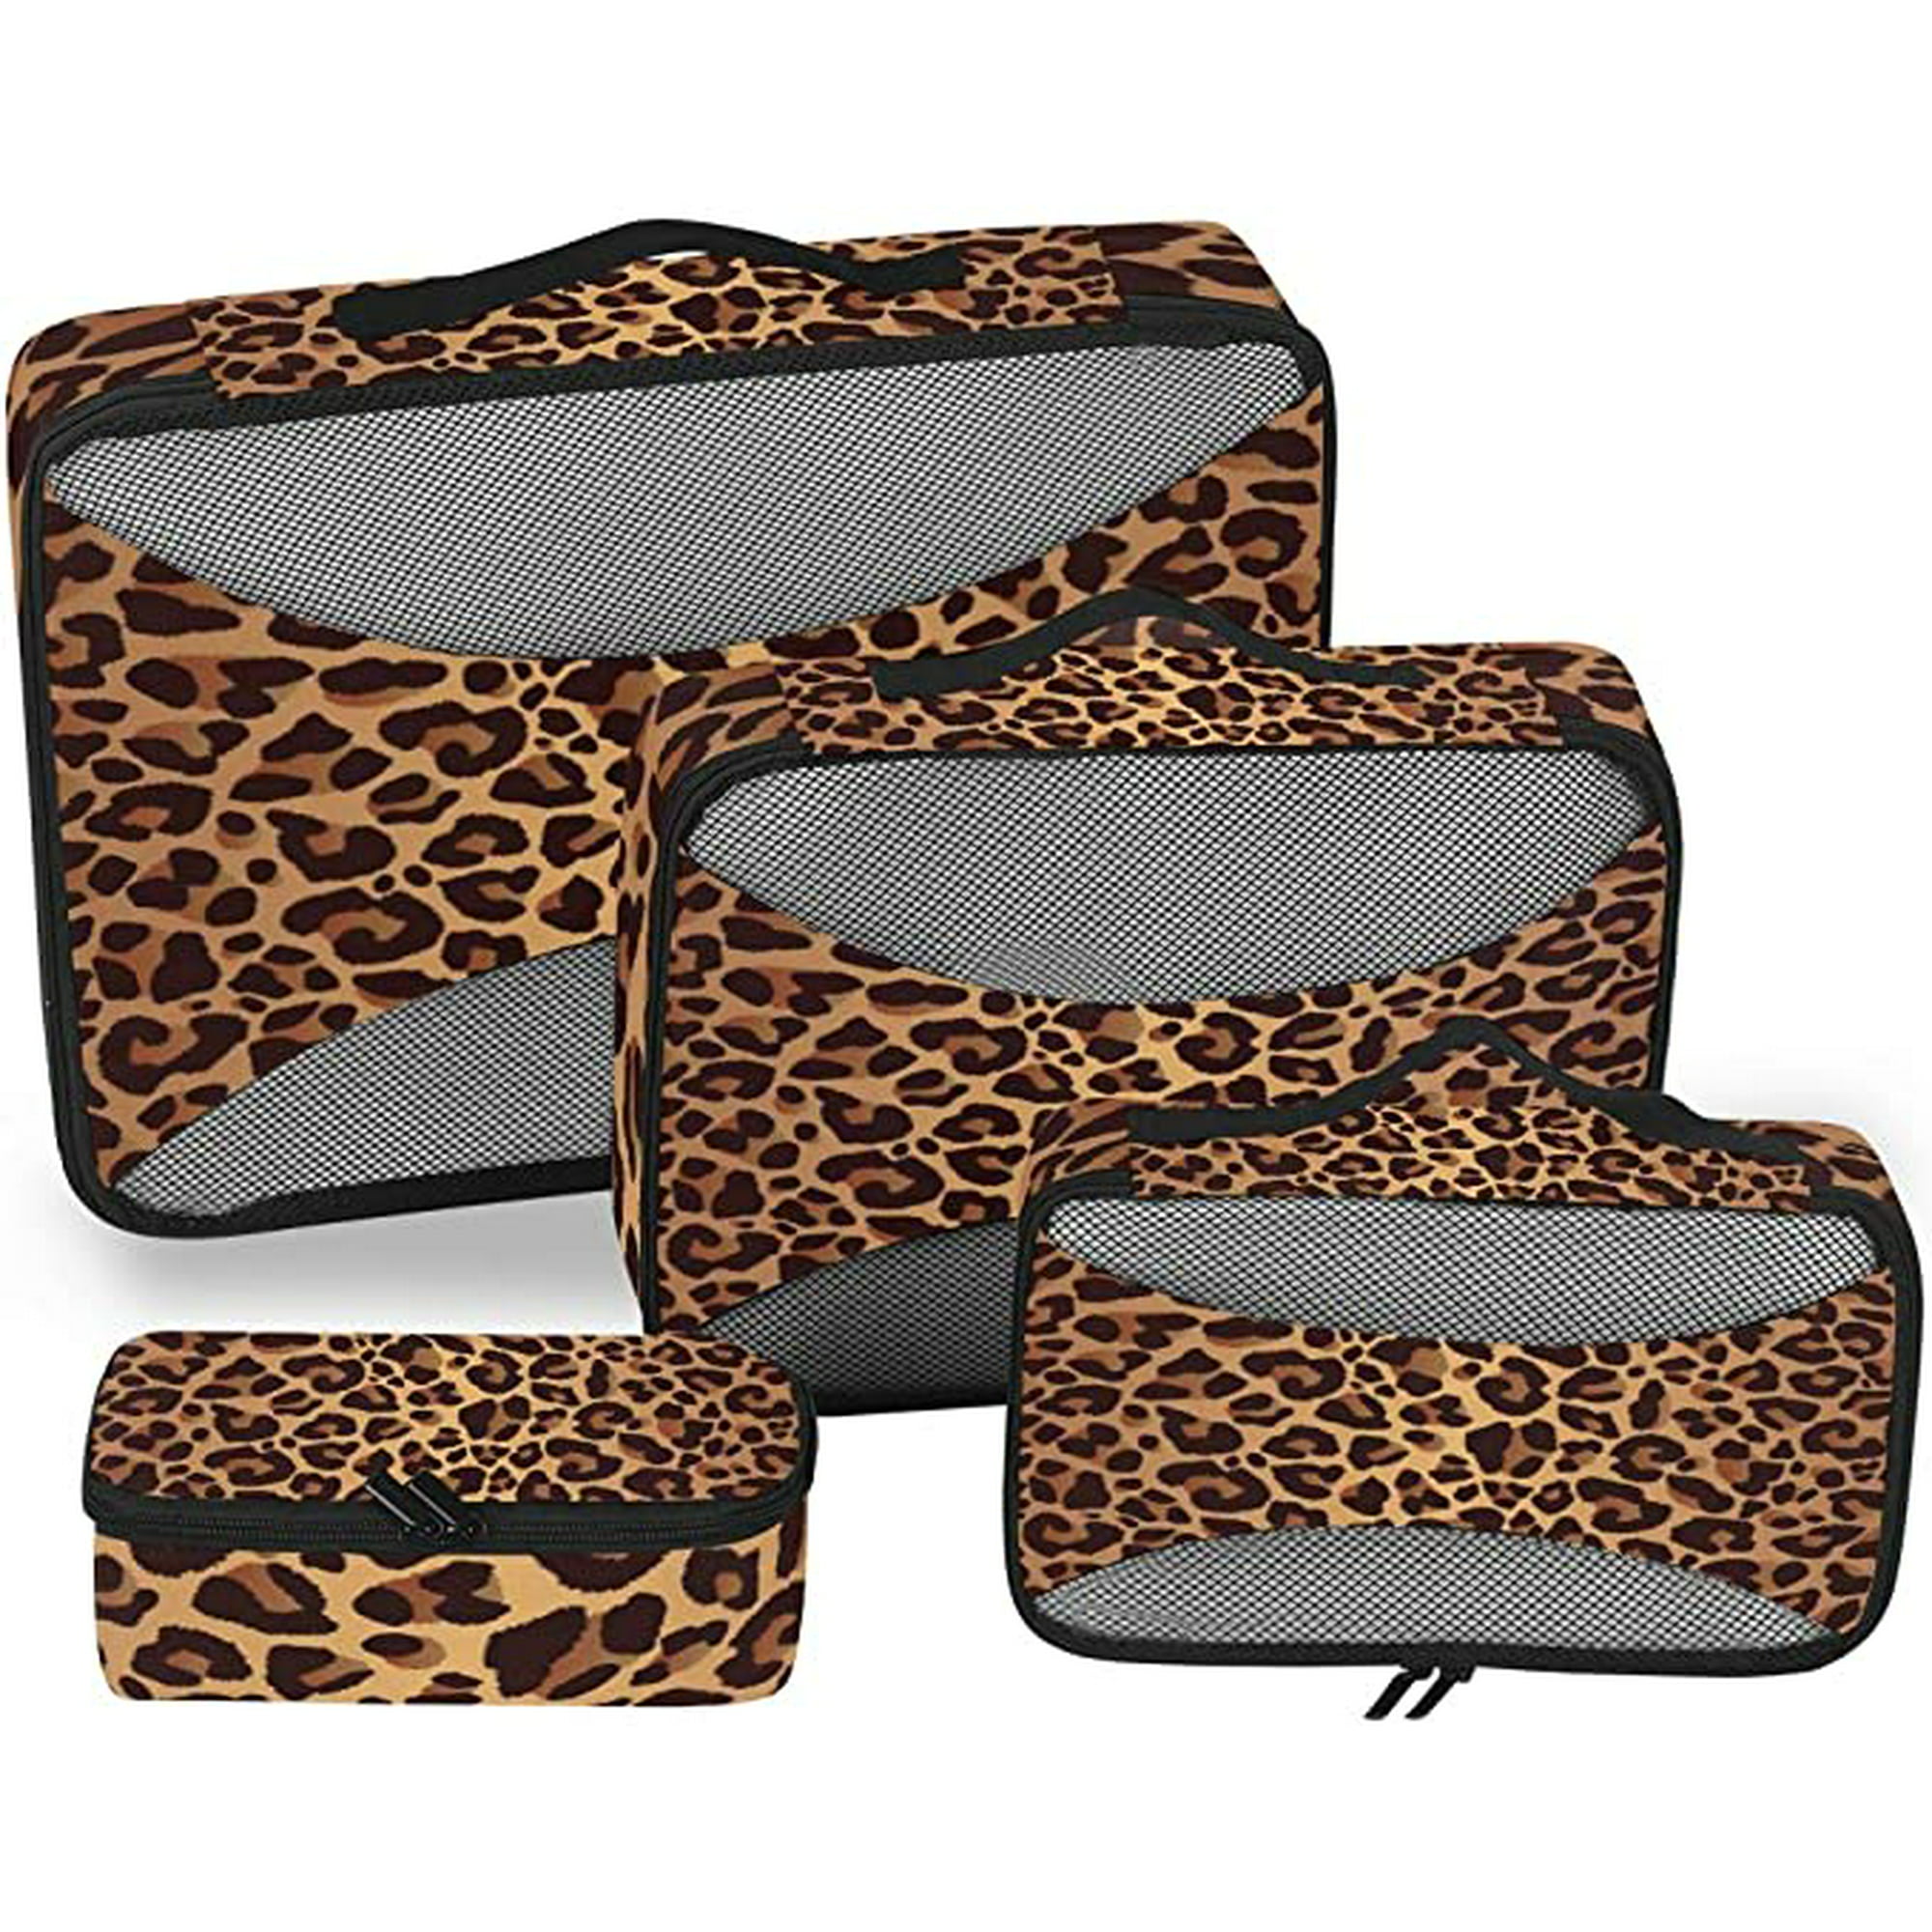 Travel Packing Cubes 4 Set Leopard Animal Skin Print, Carry on Luggage  Organizer Bags Mesh, Storage Pouch Accessories for Suitcase Backpacks |  Walmart Canada